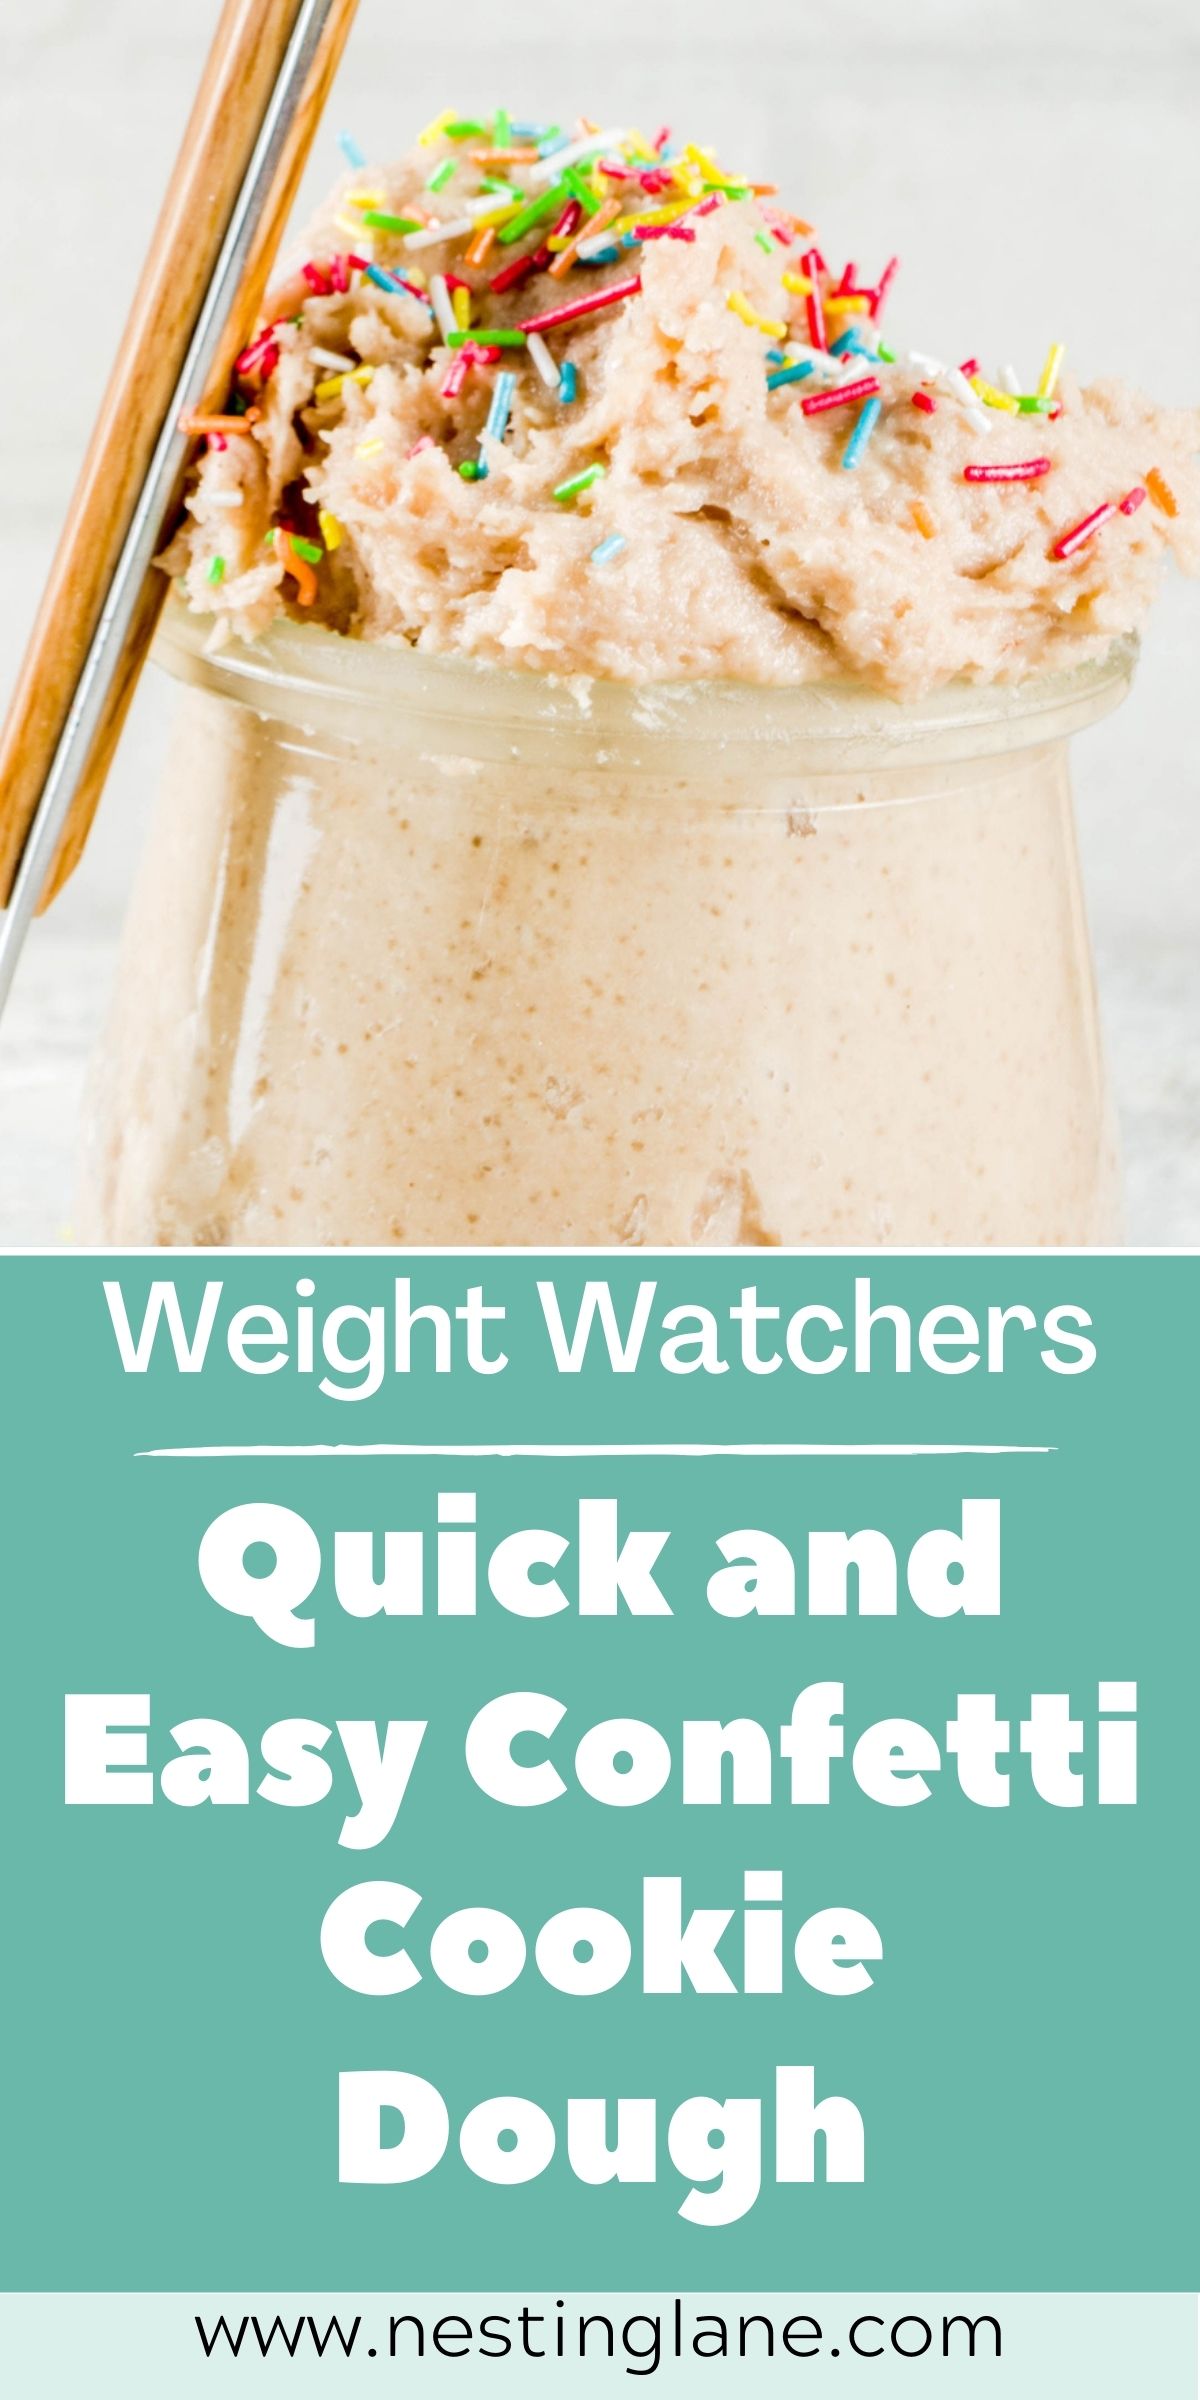 Graphic for Pinterest of Quick and Easy Weight Watchers Confetti Cookie Dough Recipe.